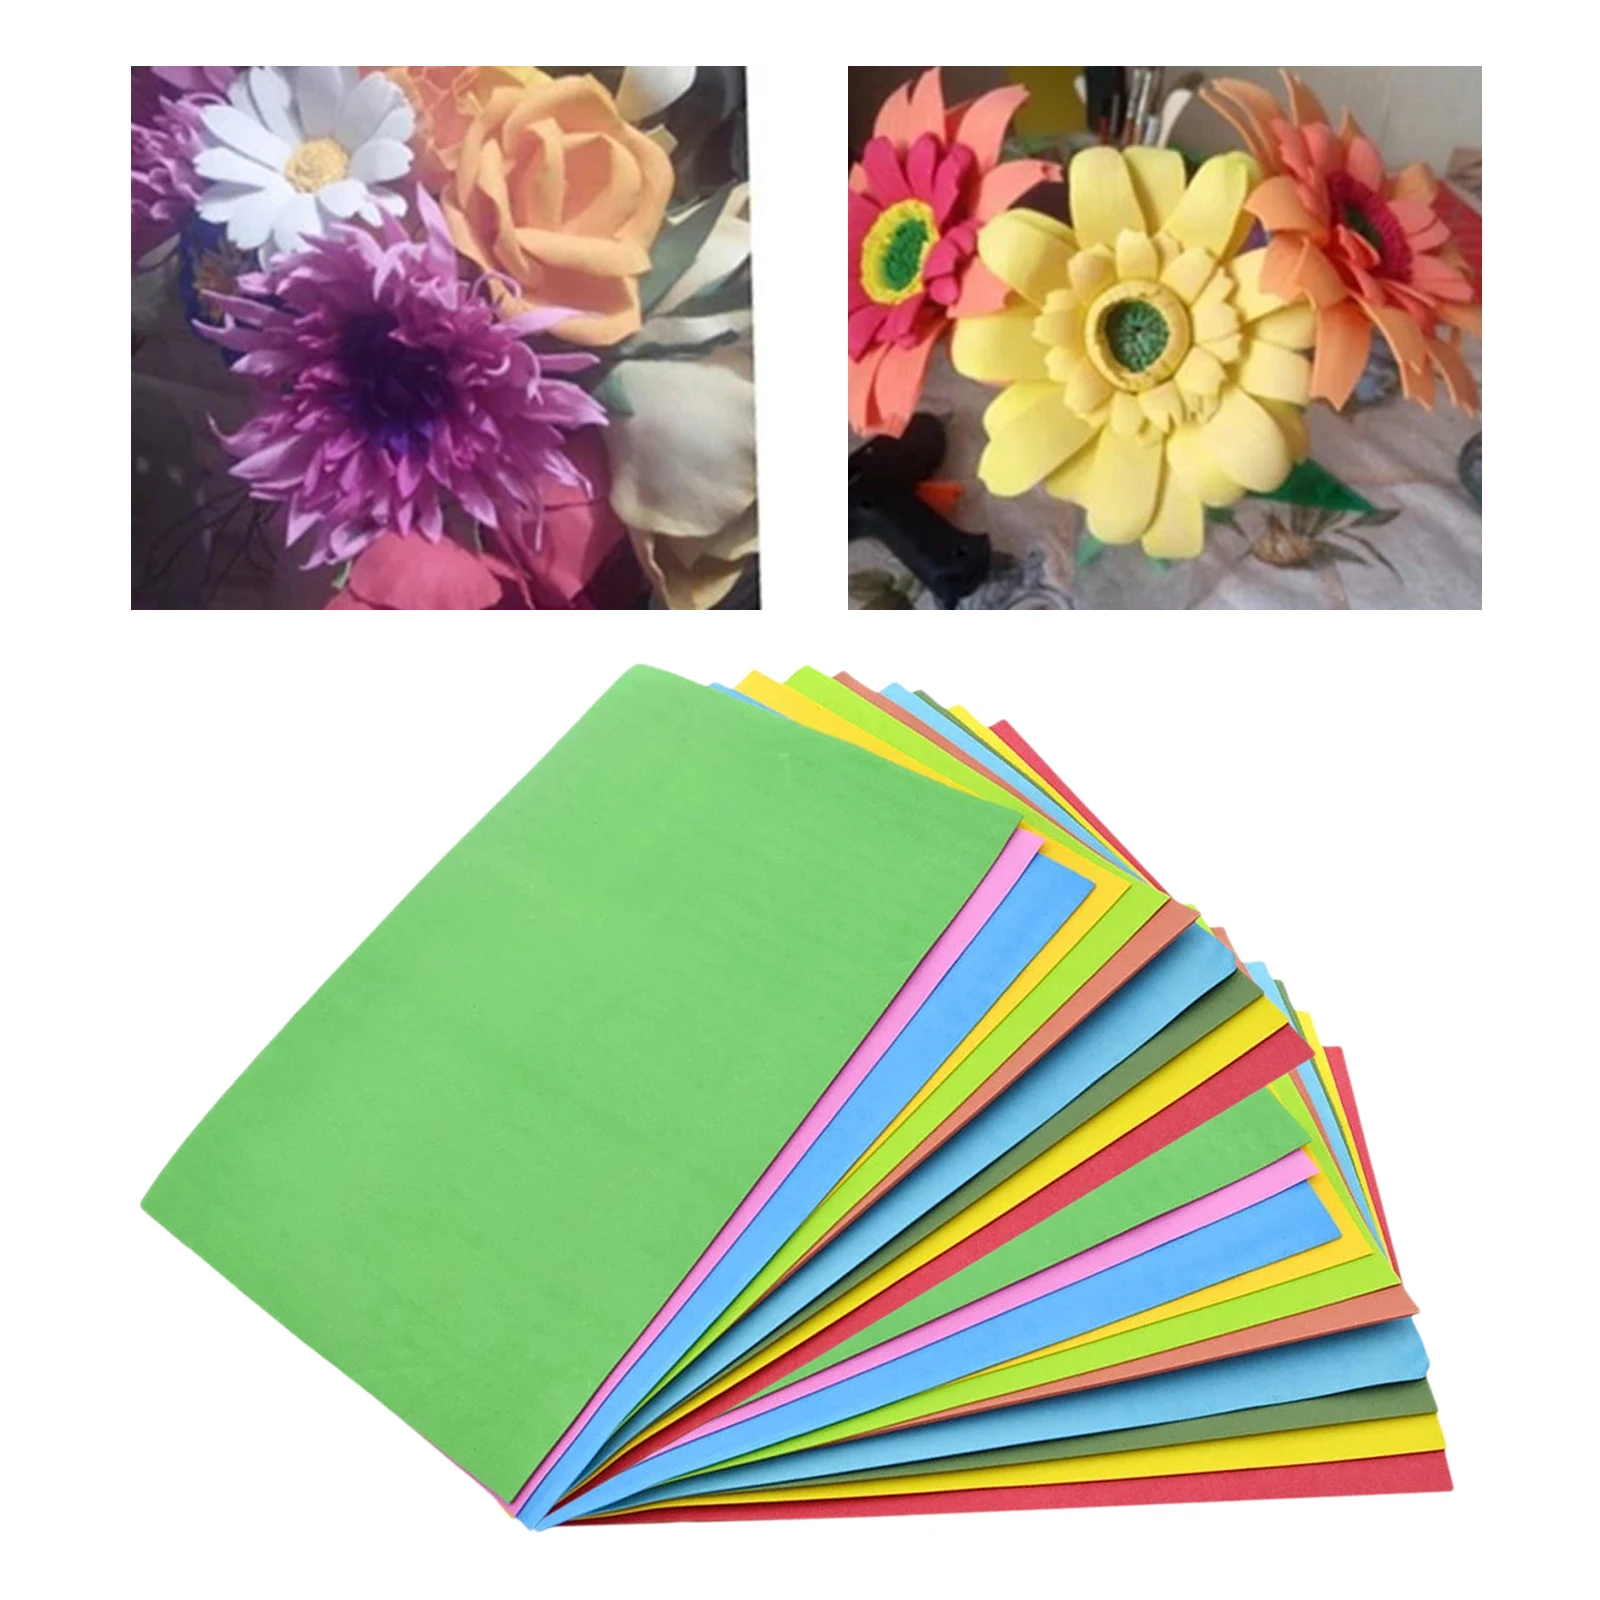 Foam Sponge Paper 50 Handicraft Sheets for Arts and Crafts for Kids Scrapbooking, Crafting Class Early Education